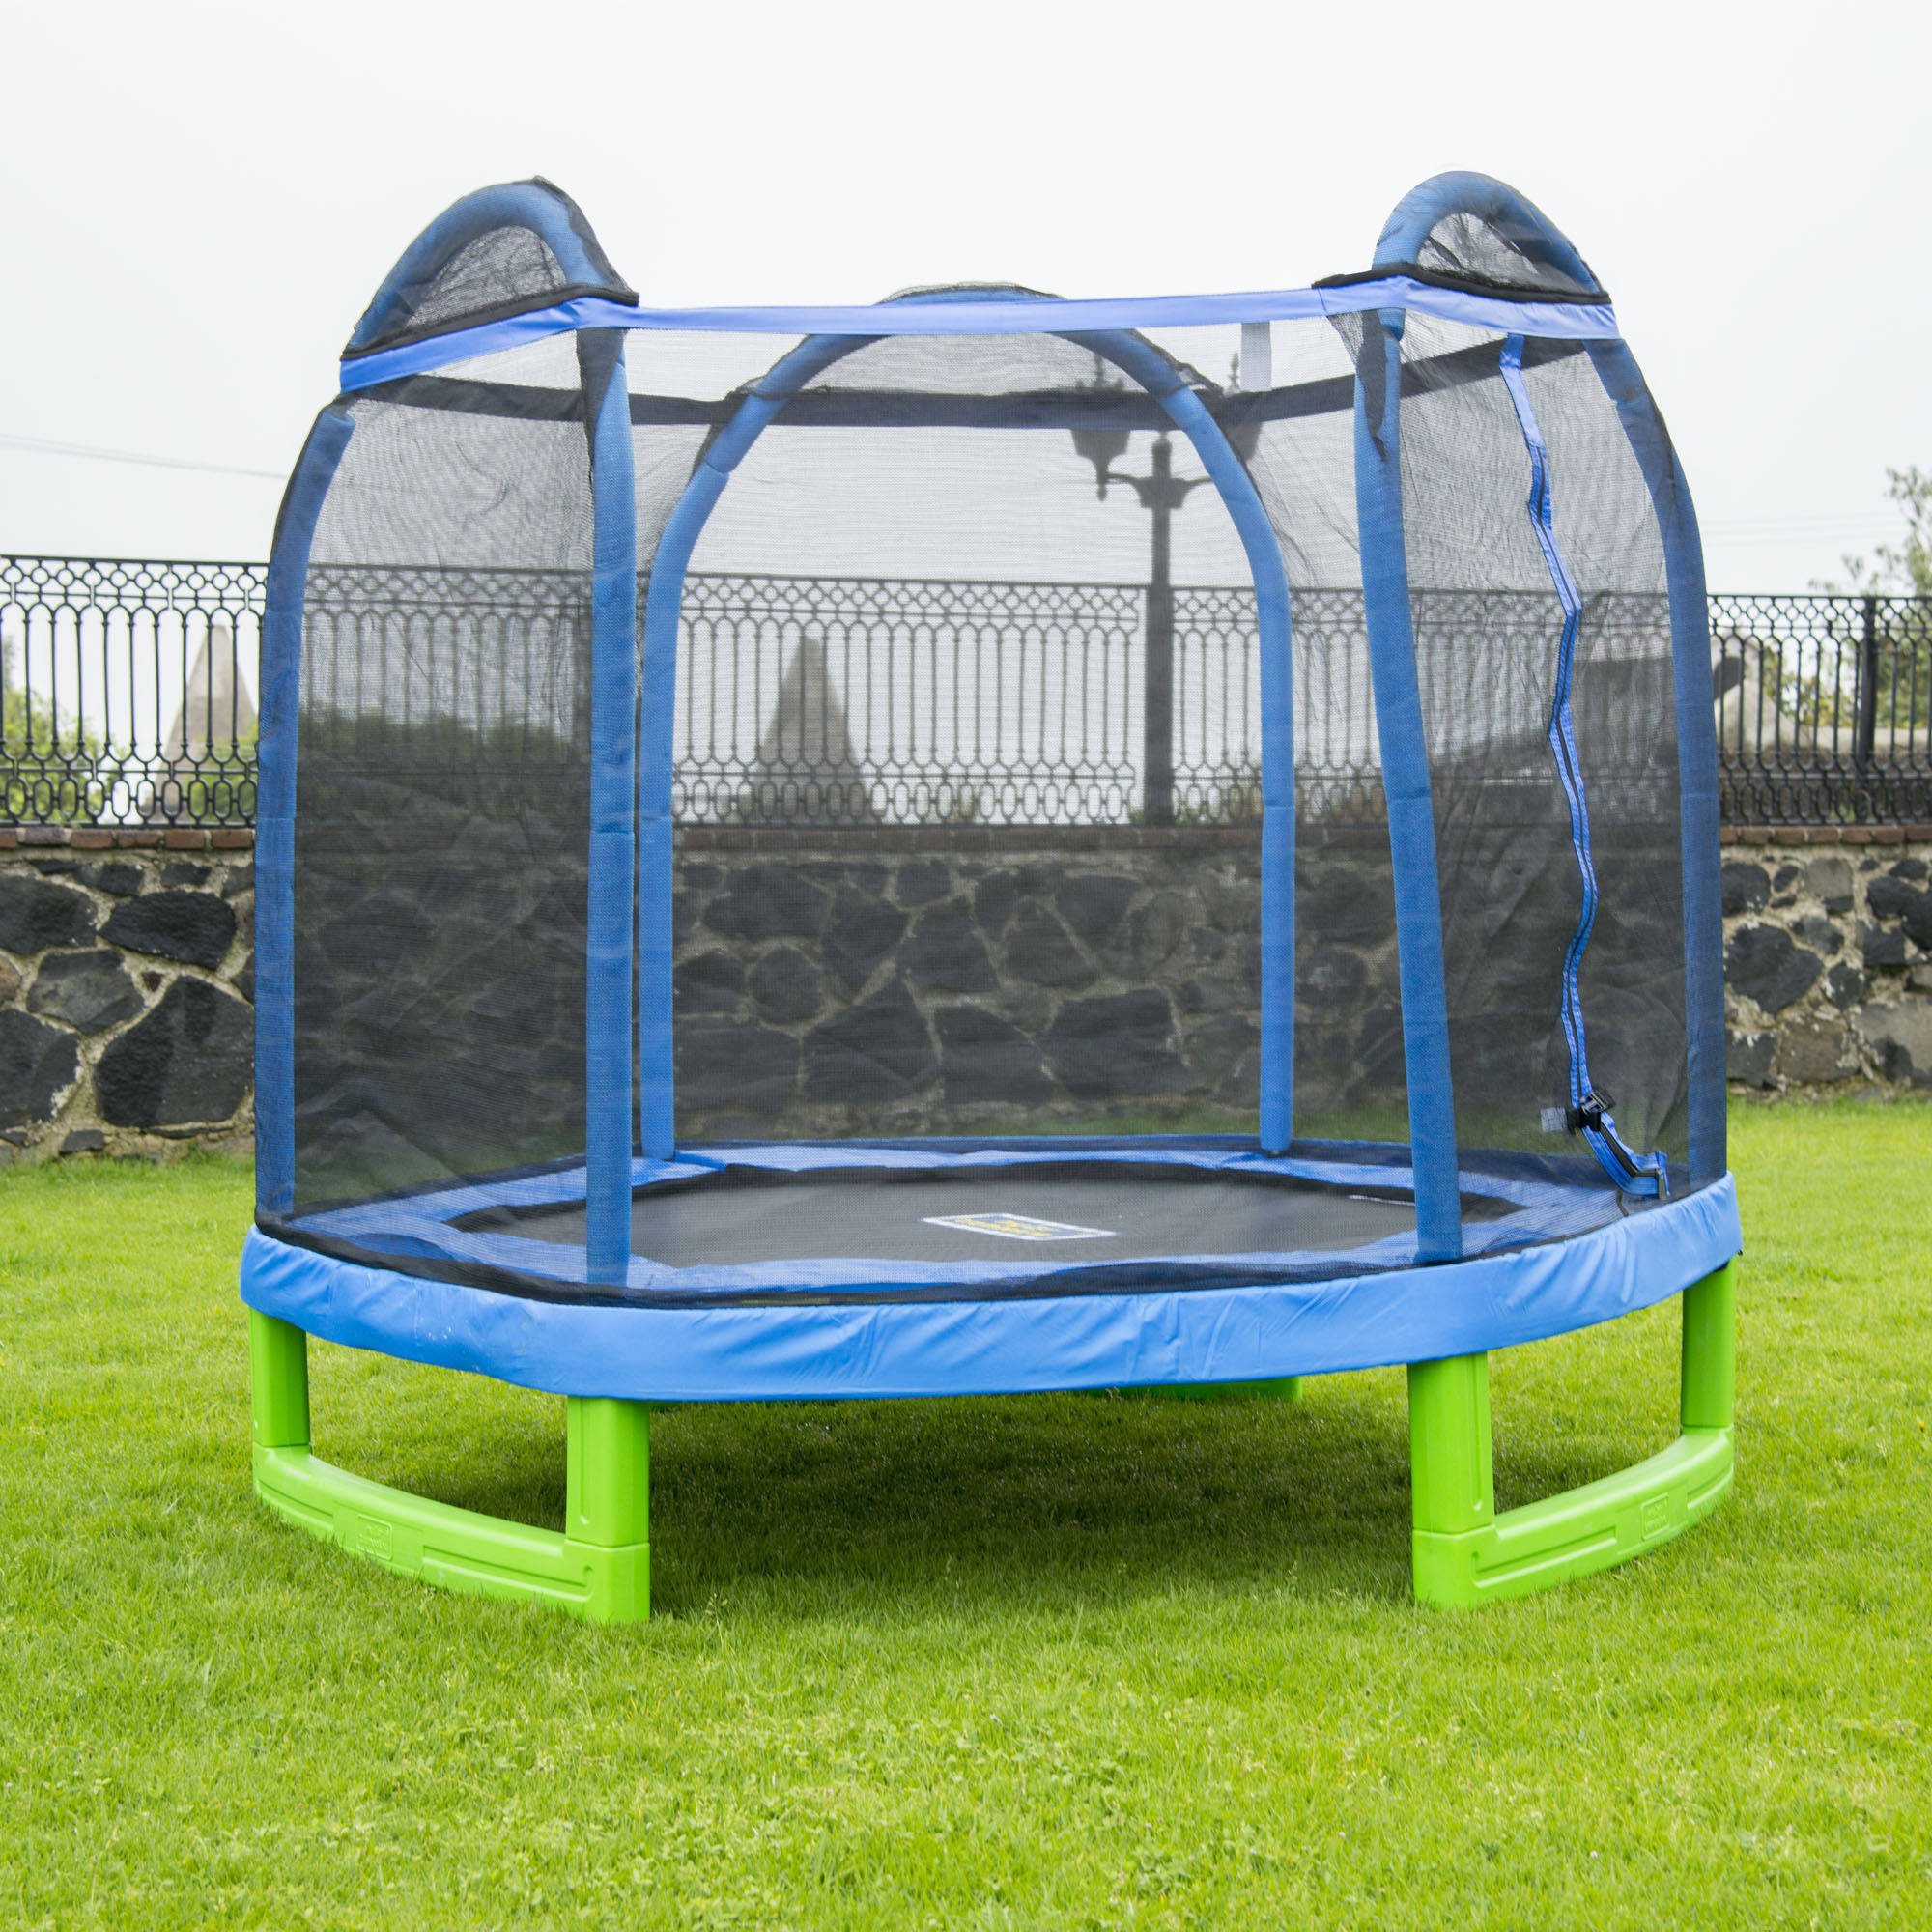 Outdoor Trampoline For Kids
 Bounce Pro 7 Foot My First Trampoline Hexagon Ages 3 10